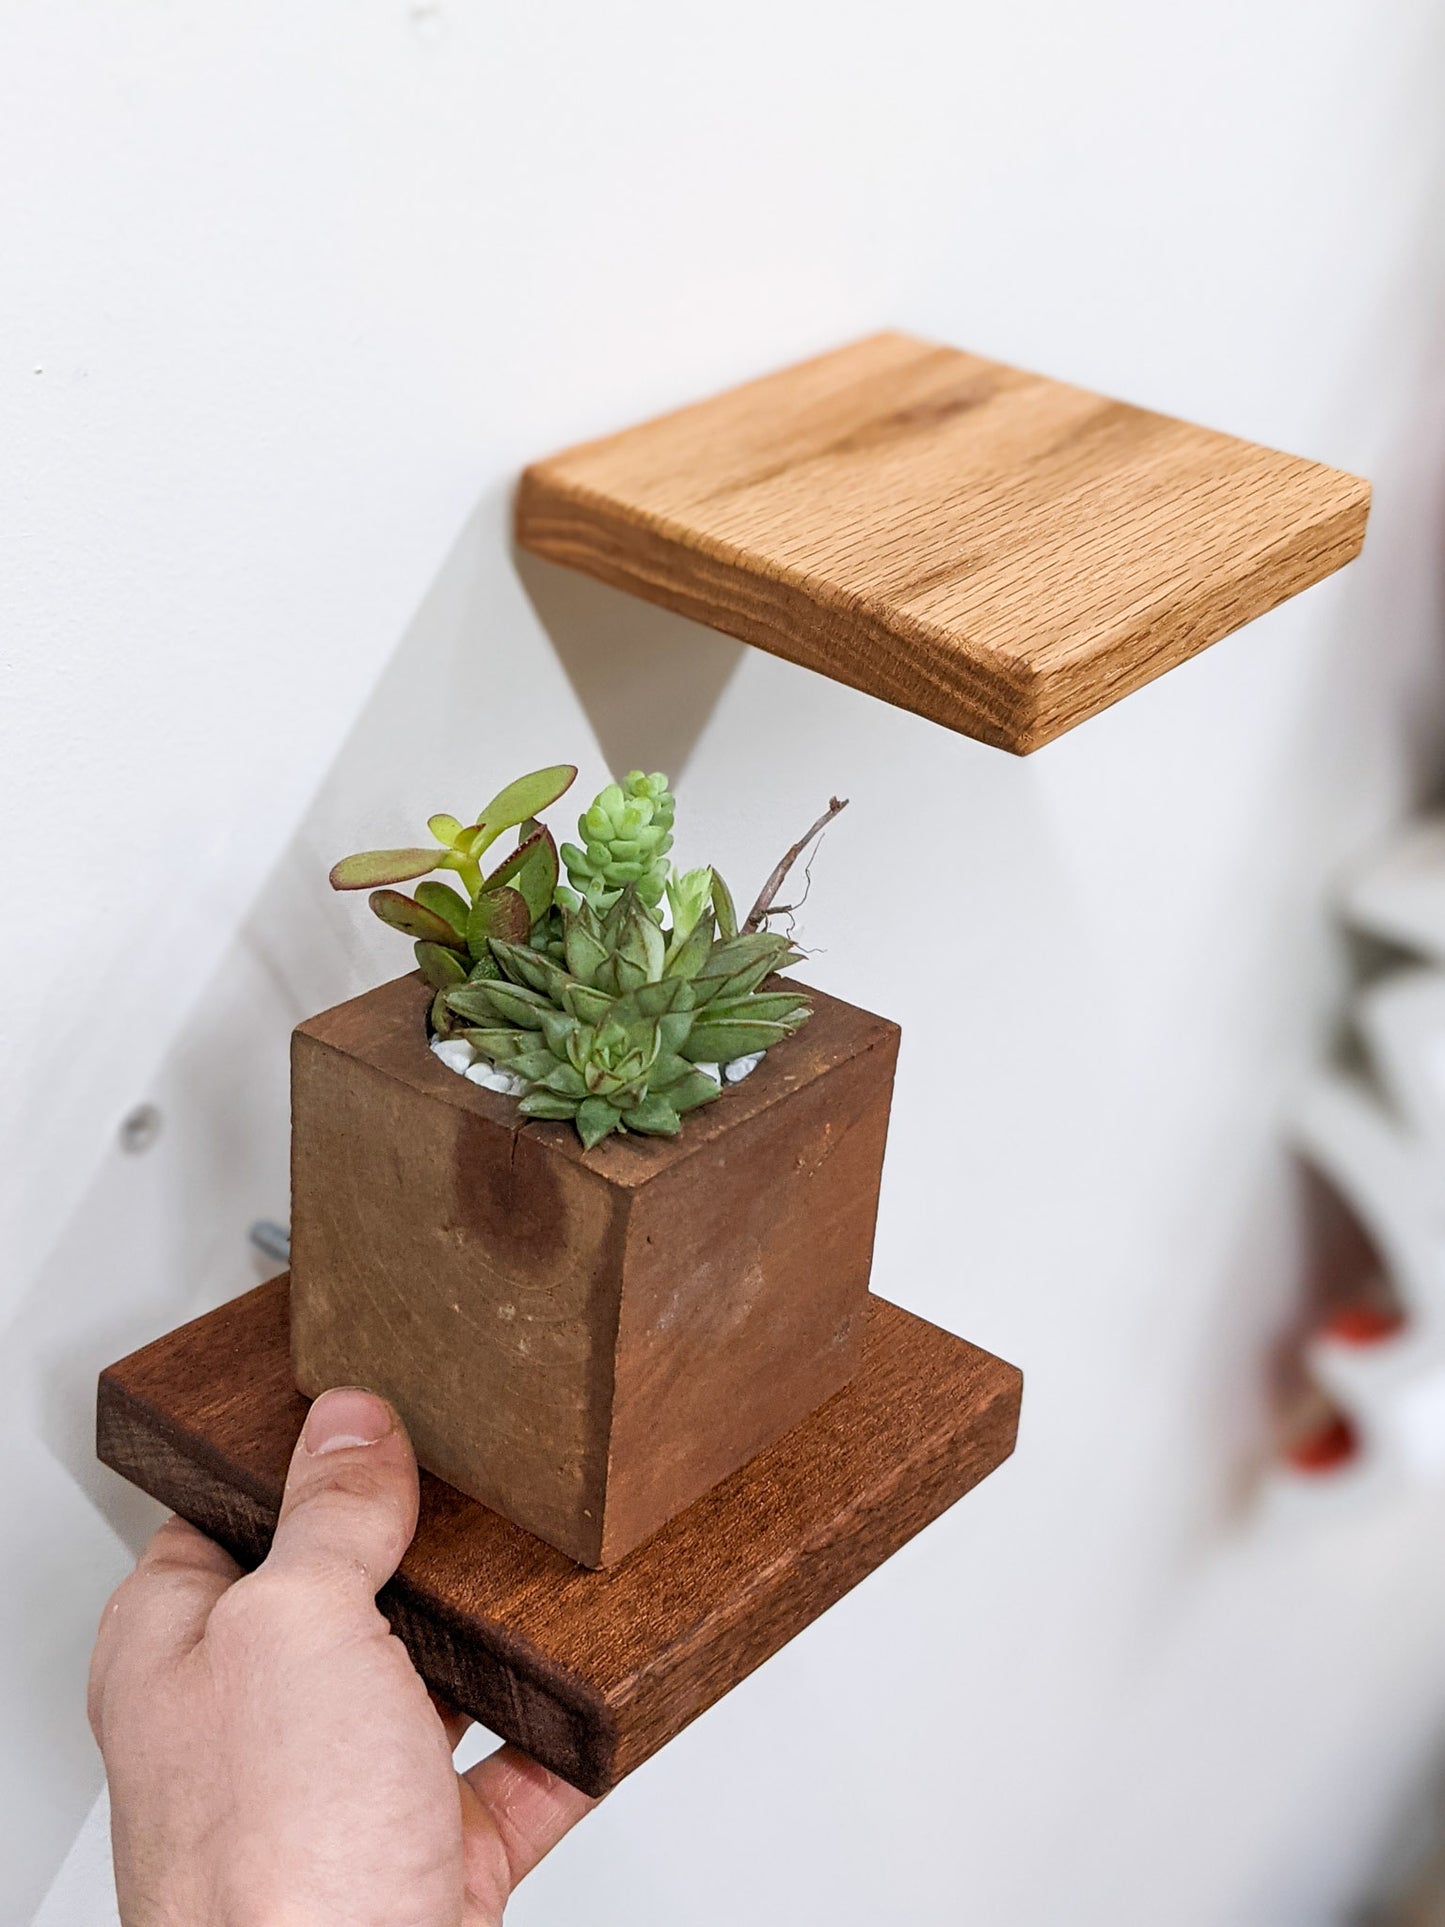 A hand installs a small wooden mahogany square shelf. In the background, a square oak floating shelf is already installed.